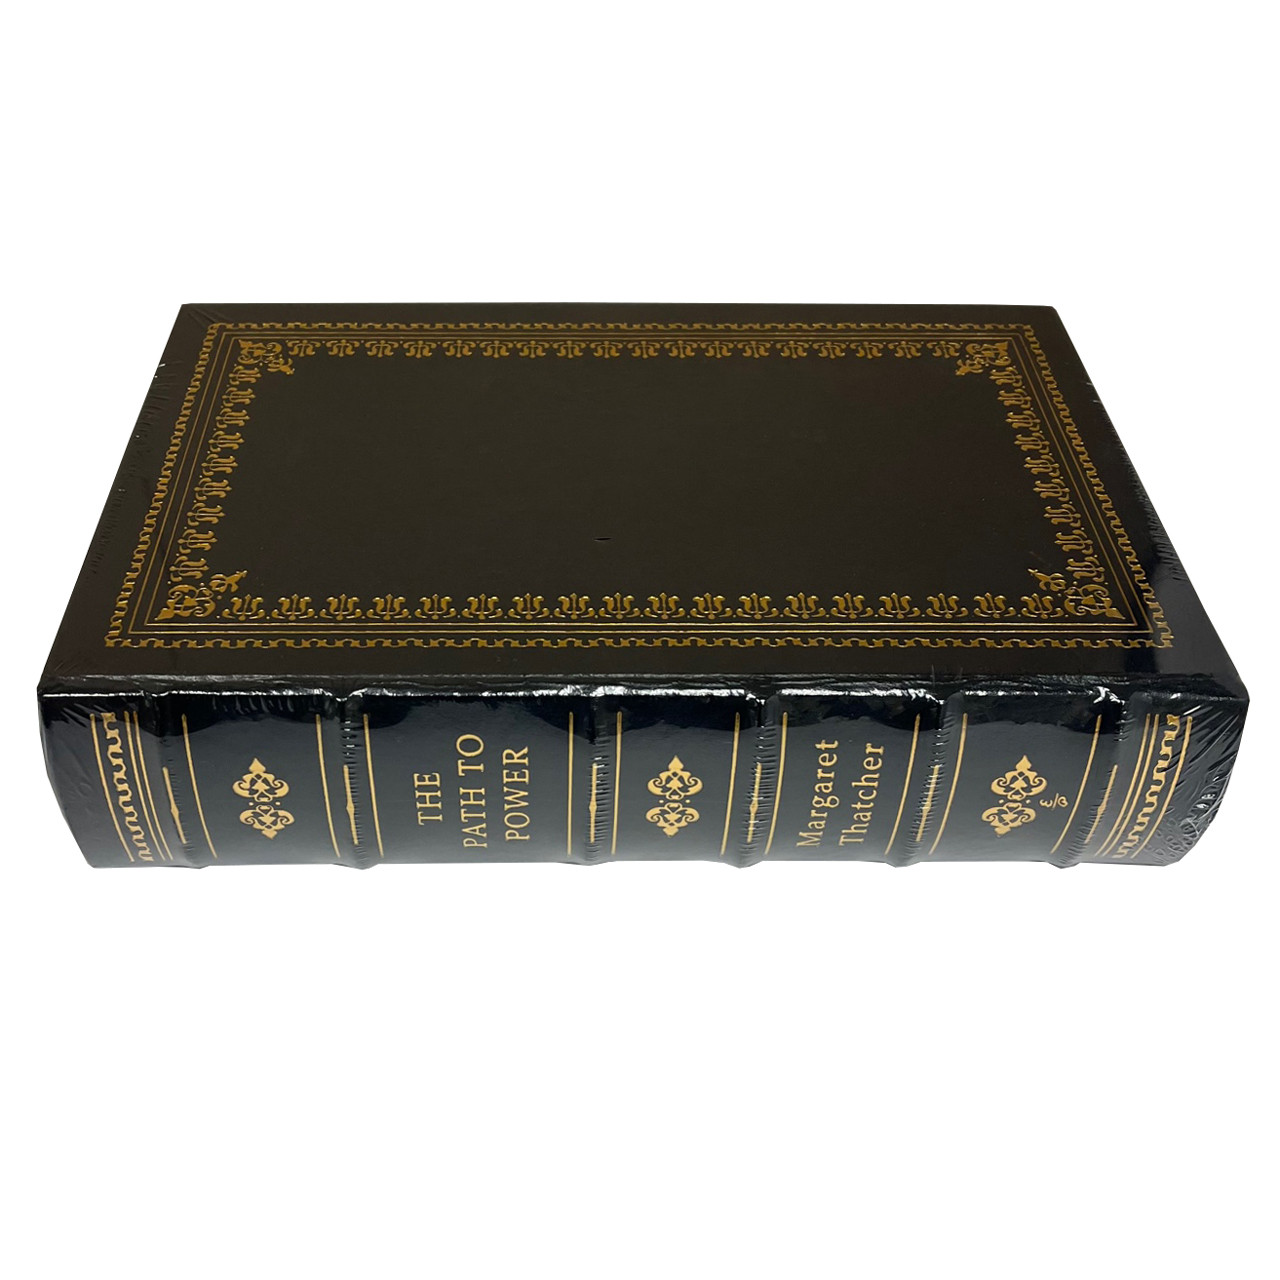 Lady Margaret Thatcher "The Path To Power" Signed First Edition, Leather Bound Collector's Edition of 3,000 [Sealed]